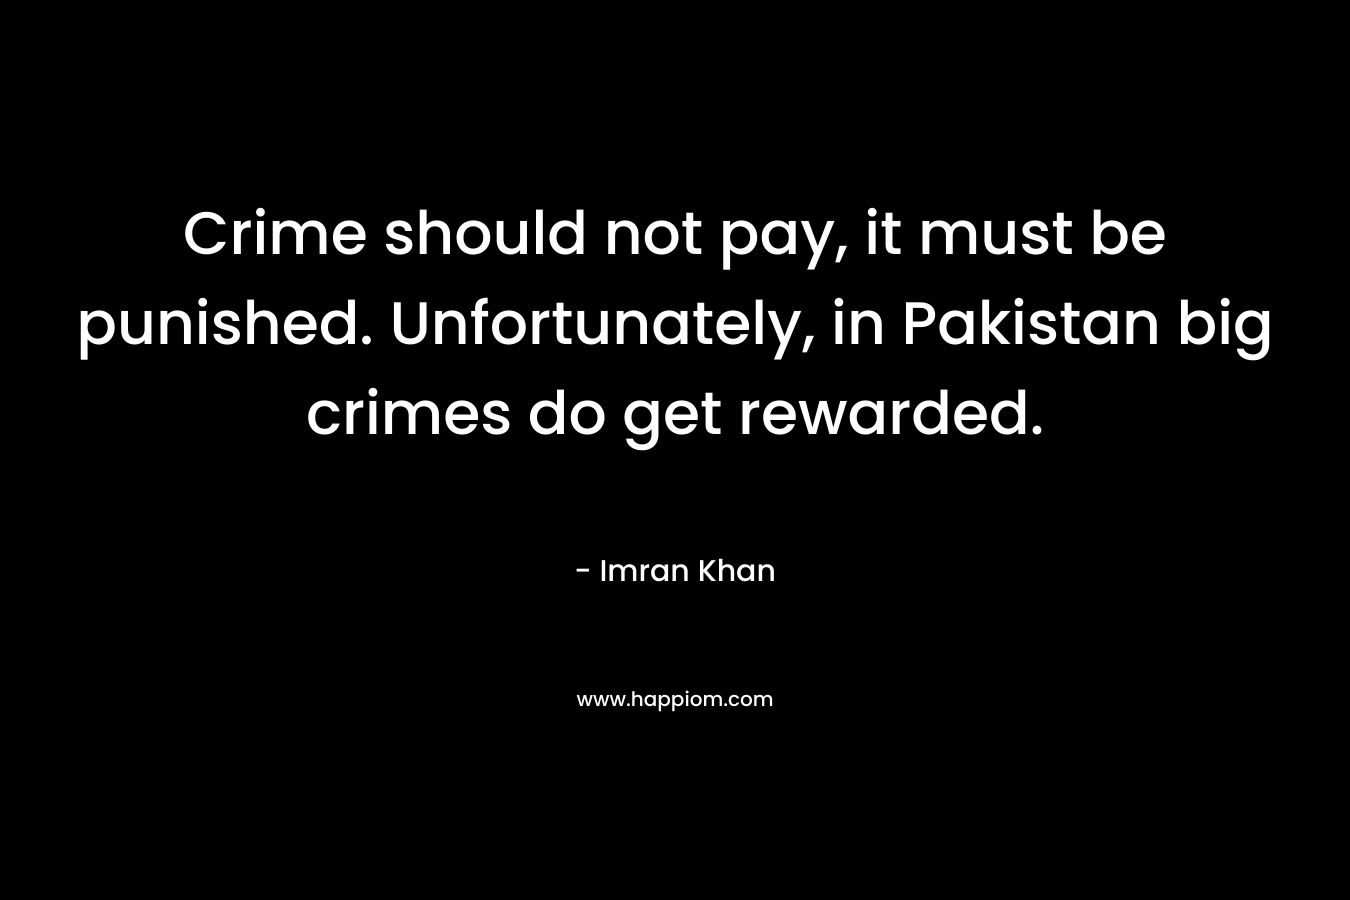 Crime should not pay, it must be punished. Unfortunately, in Pakistan big crimes do get rewarded. – Imran Khan